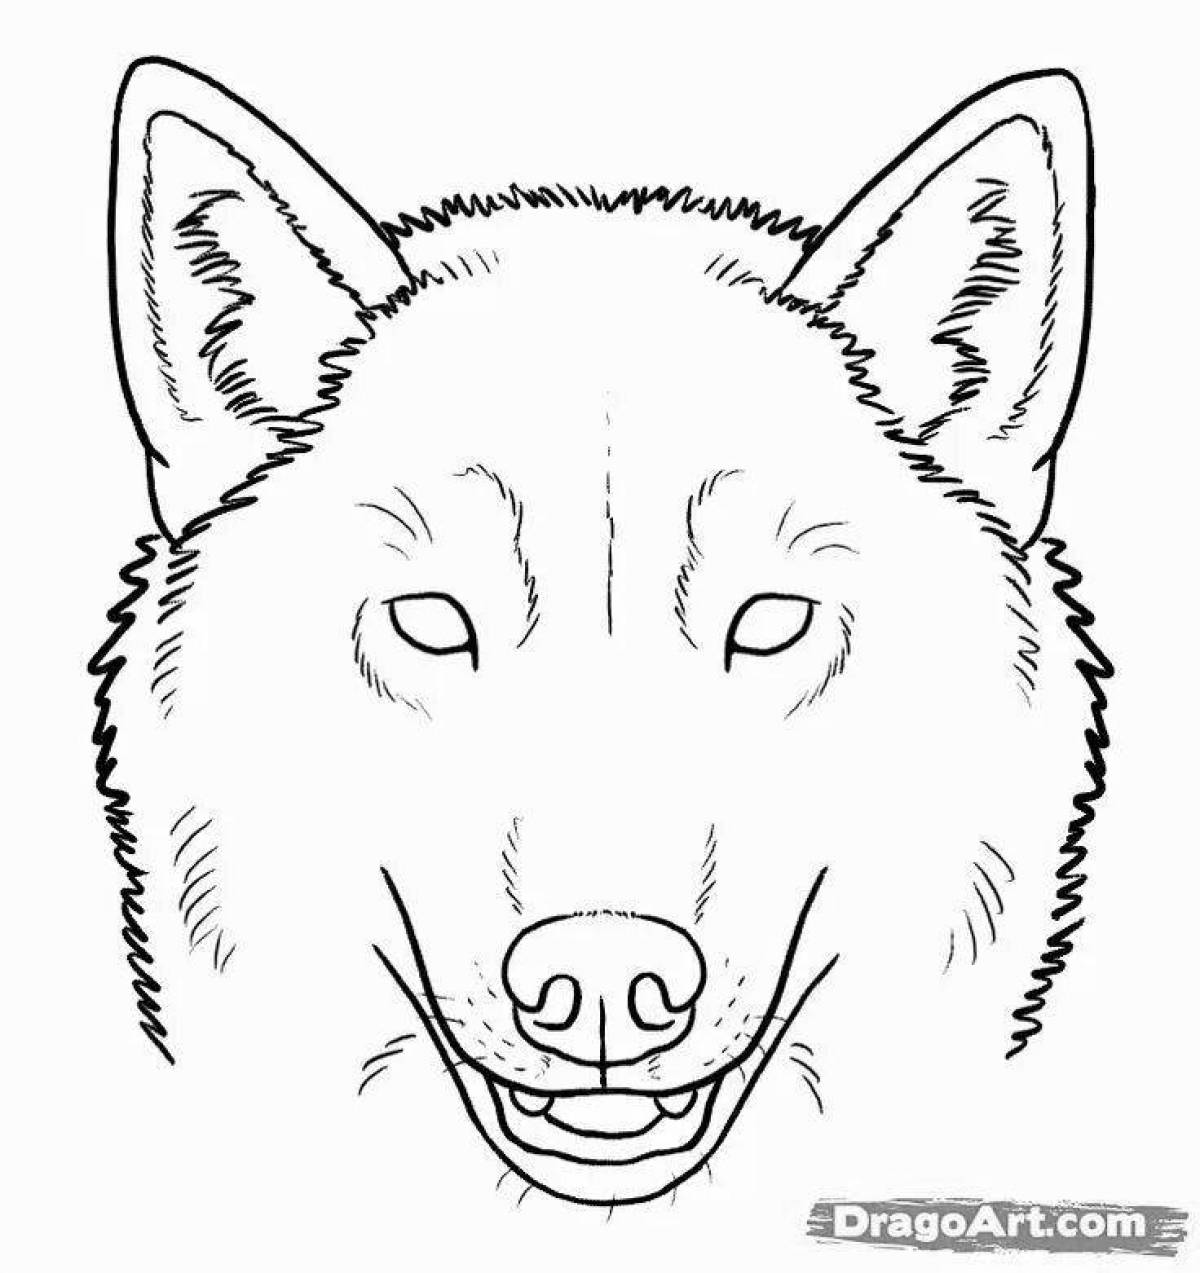 Delightful wolf mask coloring book